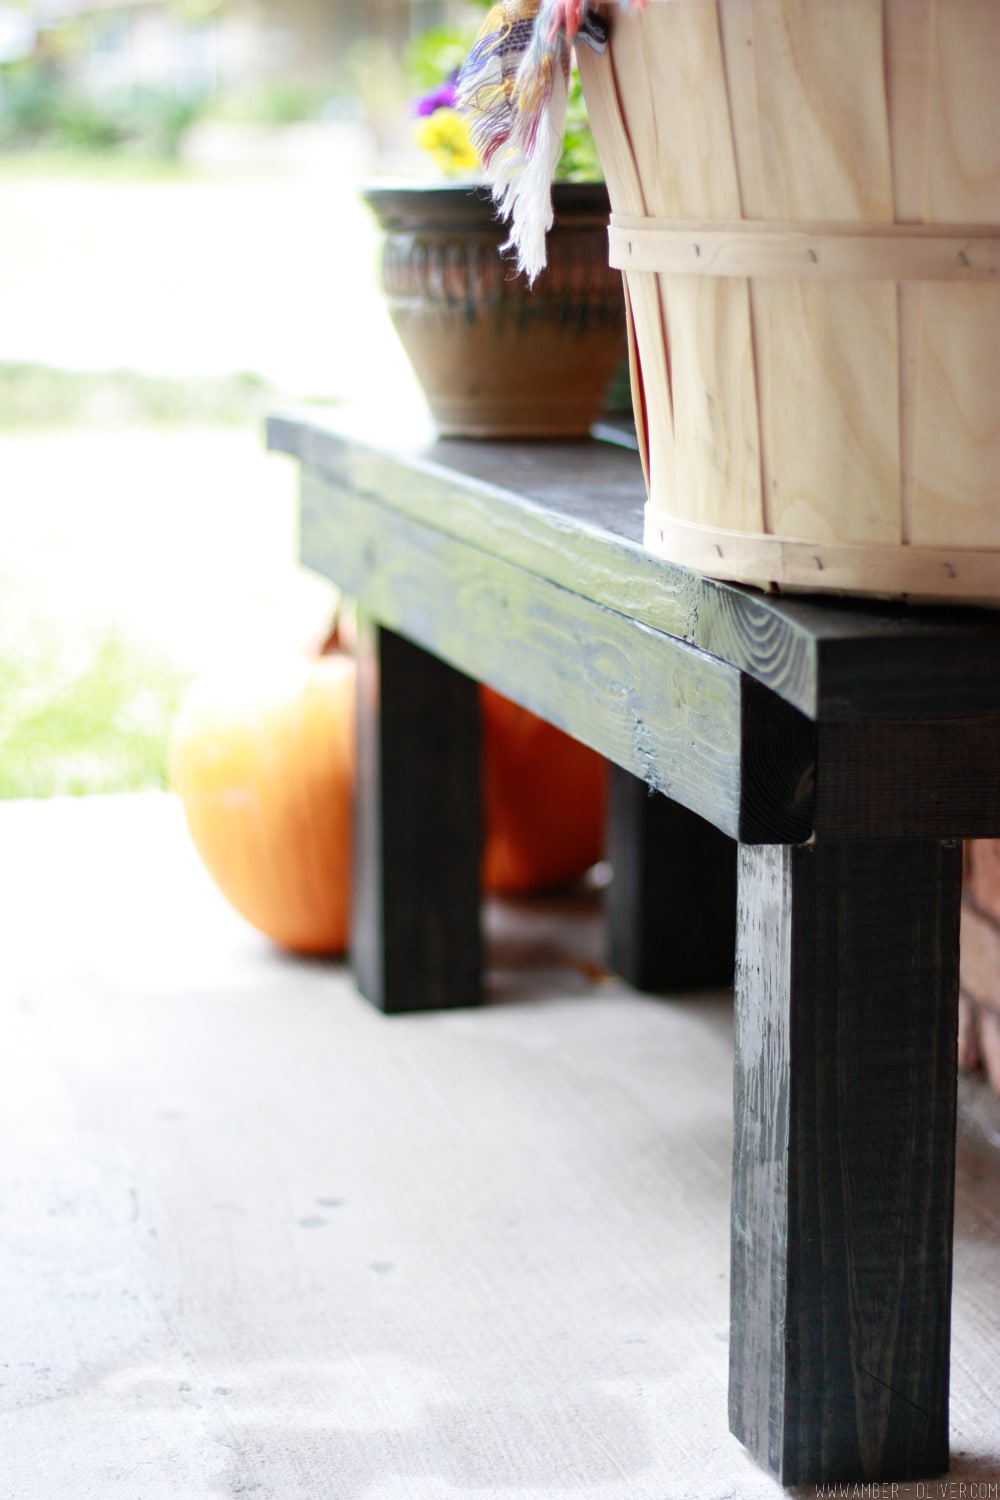 DIY Bench (free cut list!) - Quick and easy build for extra seating in your home or porch